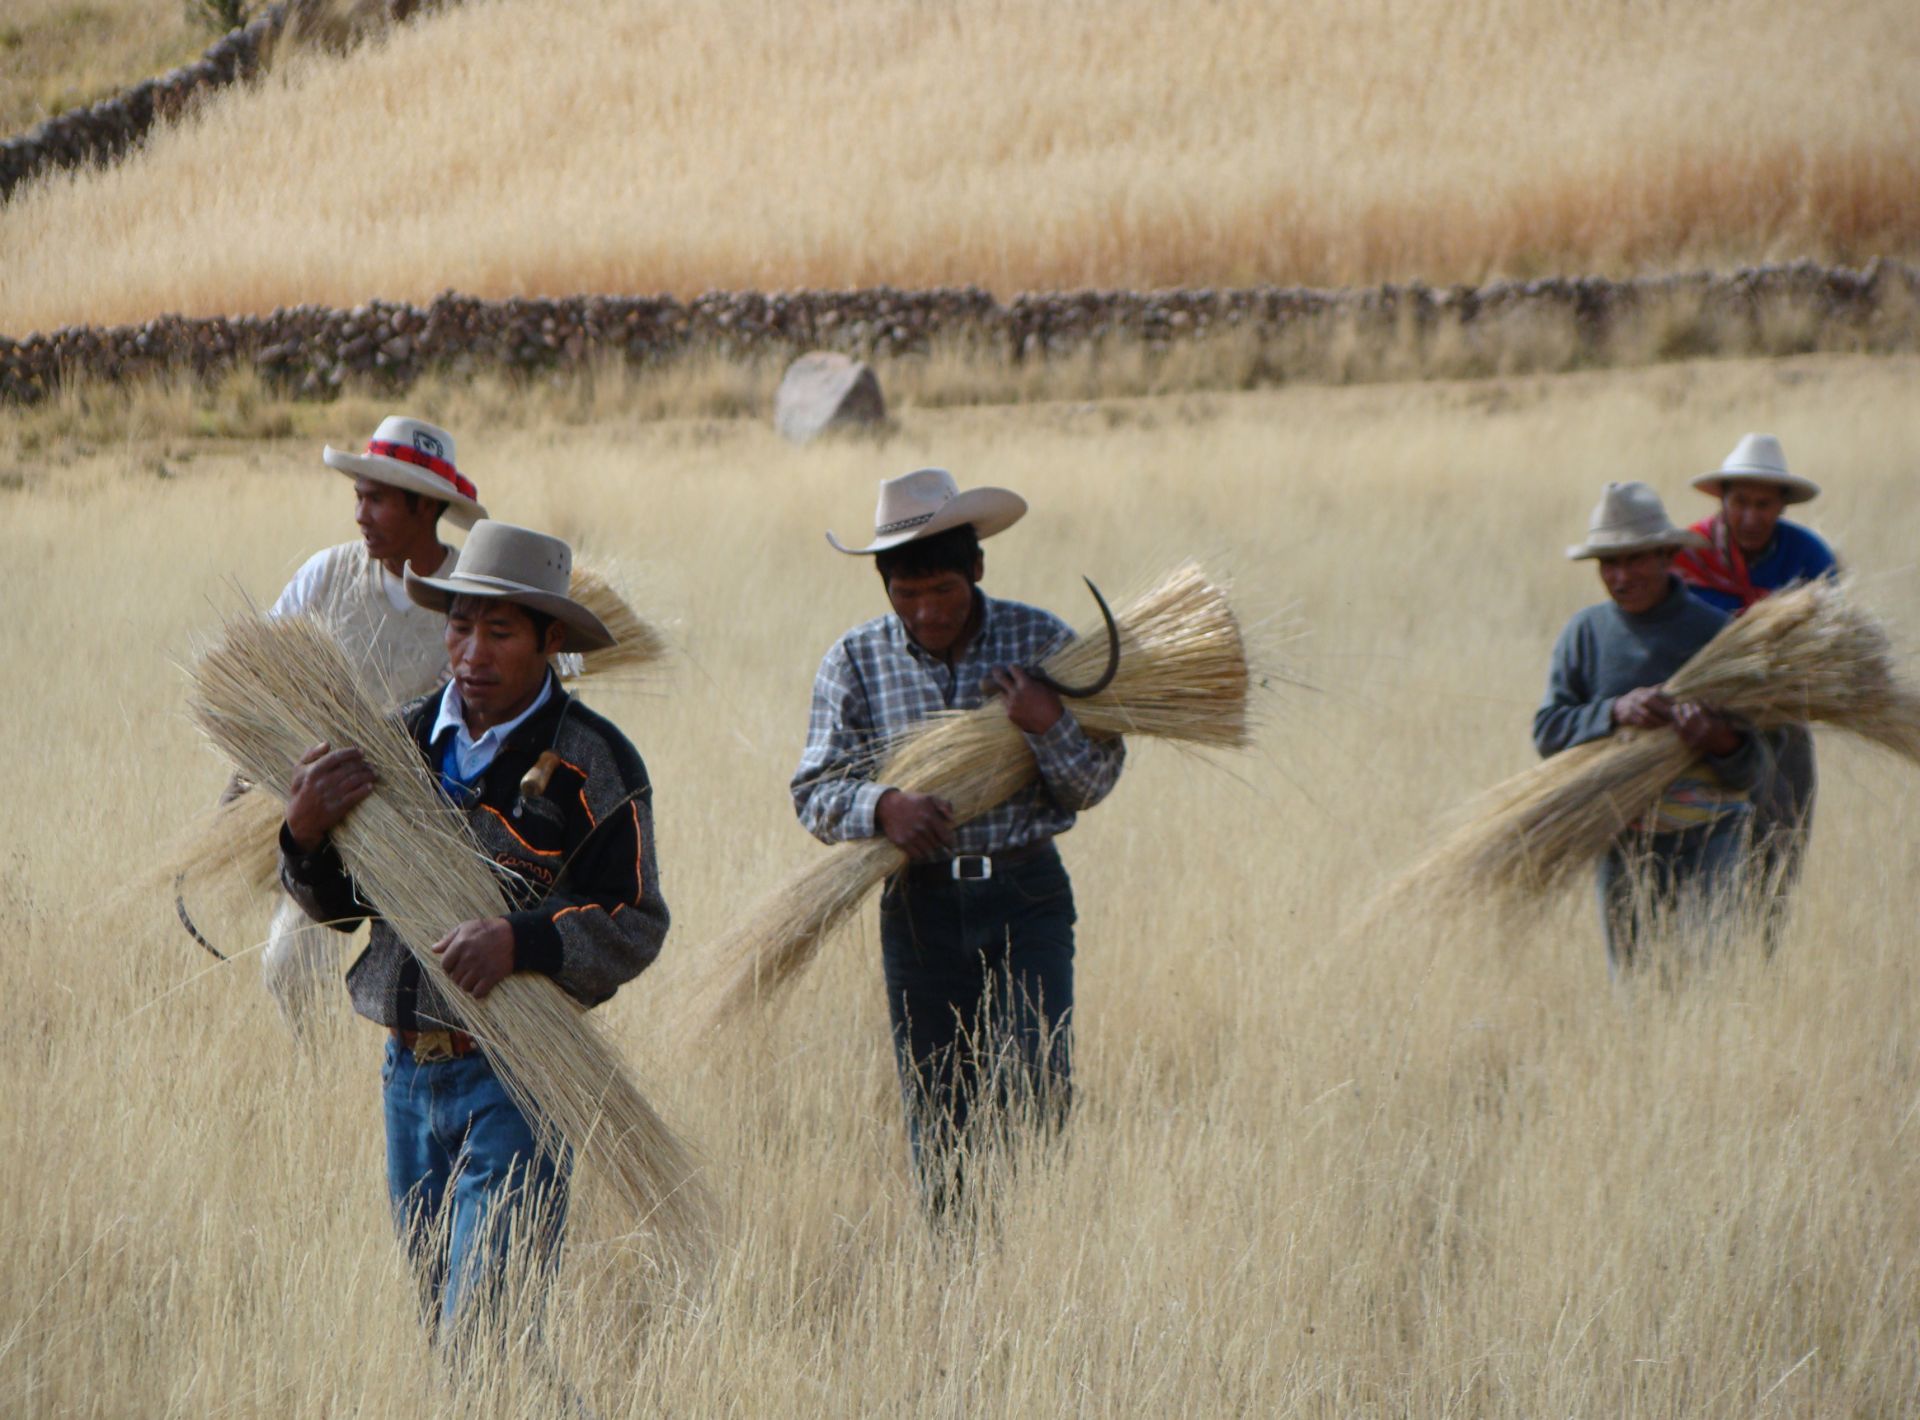 Trimming the q’oya (Andean straw used to make the bridge’s ropes)